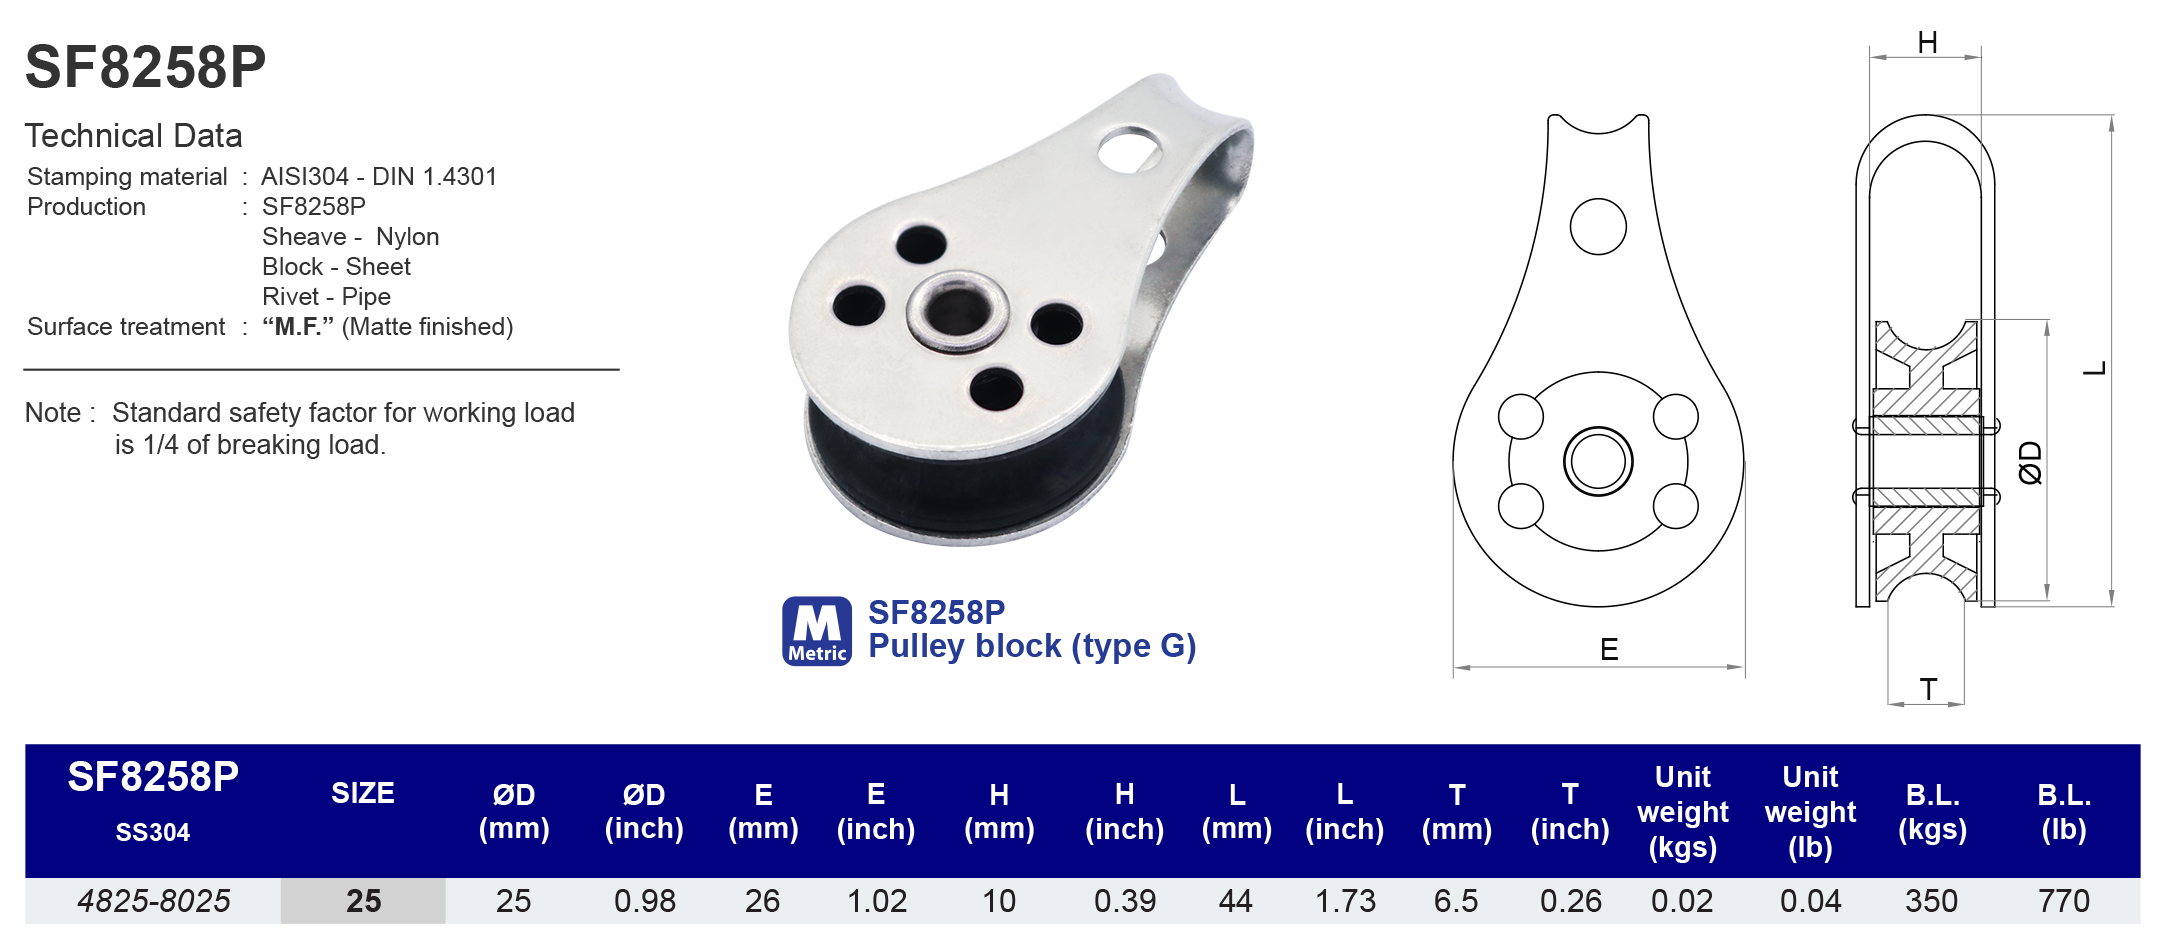 SF8258P Pulley block (type G) - 304